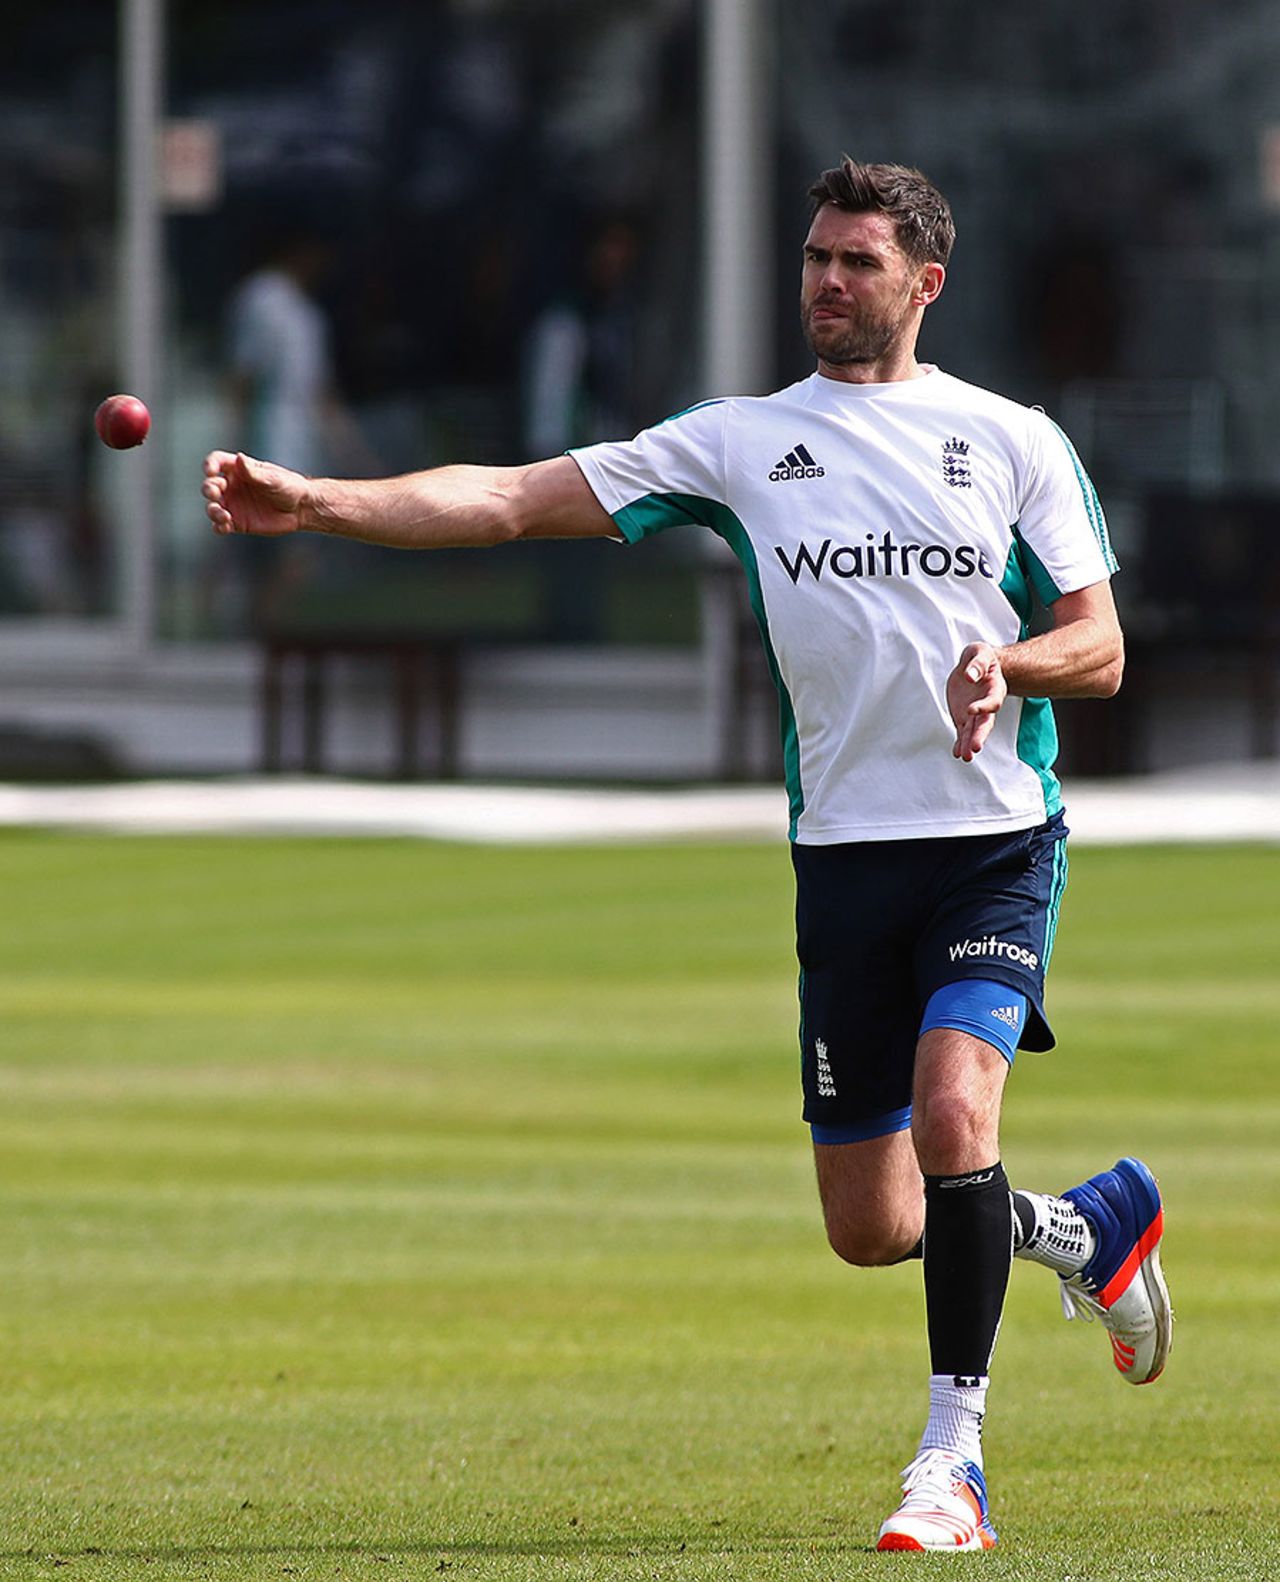 James Anderson took part in England's practice but will not play in the first Test, England v Pakistan, 1st Investec Test, Lord's, July 13, 2016